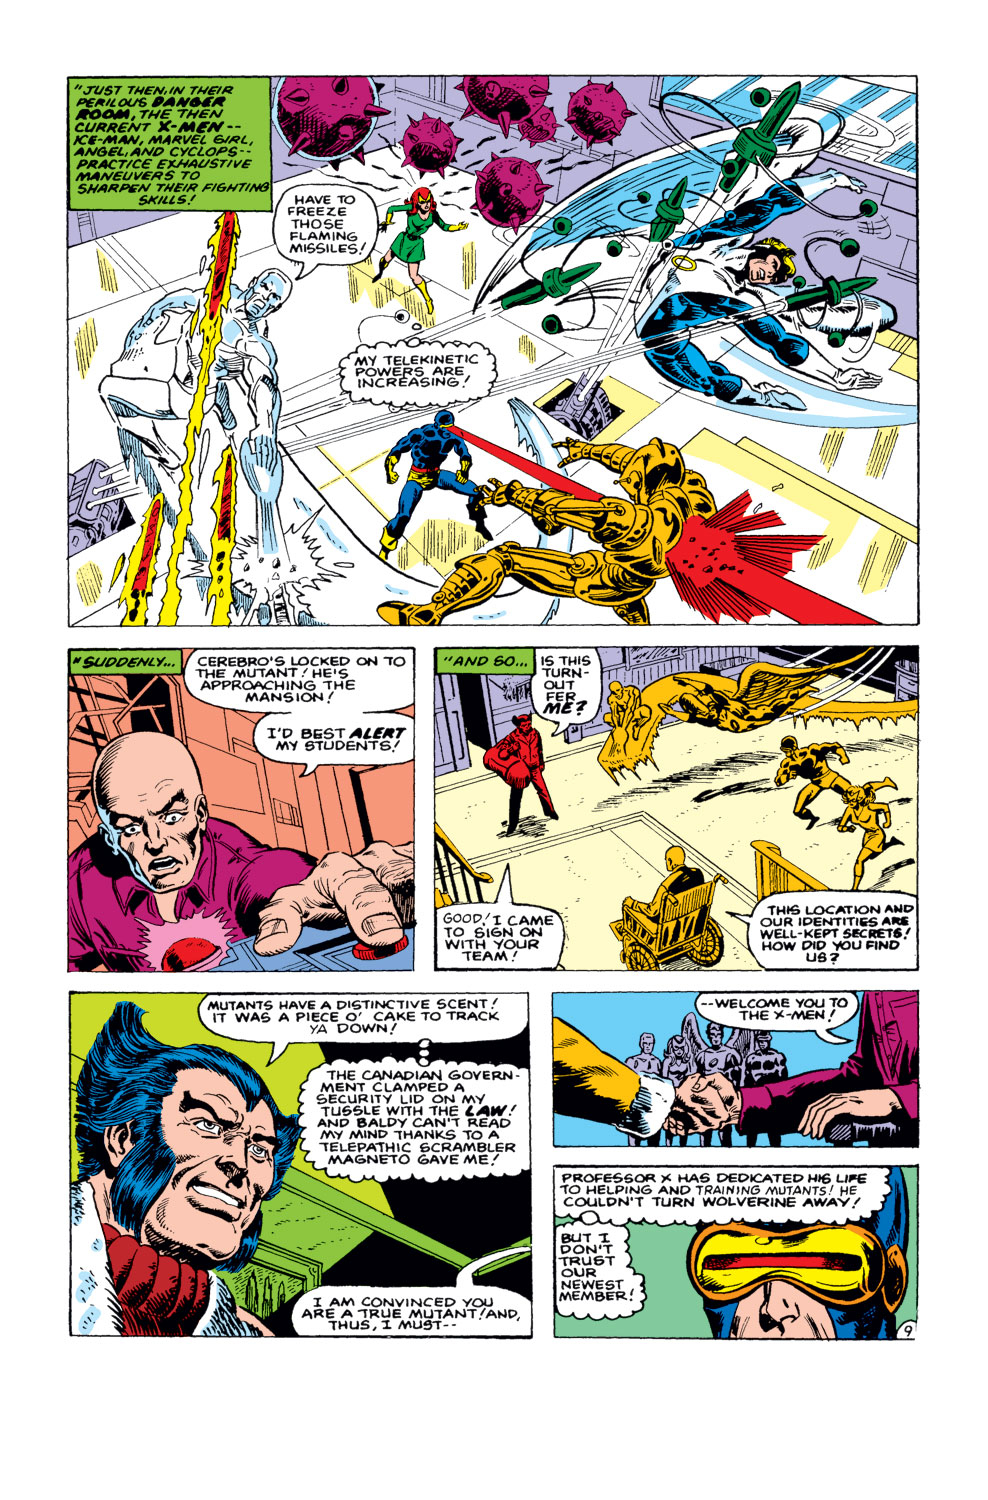 What If? (1977) issue 31 - Wolverine had killed the Hulk - Page 10